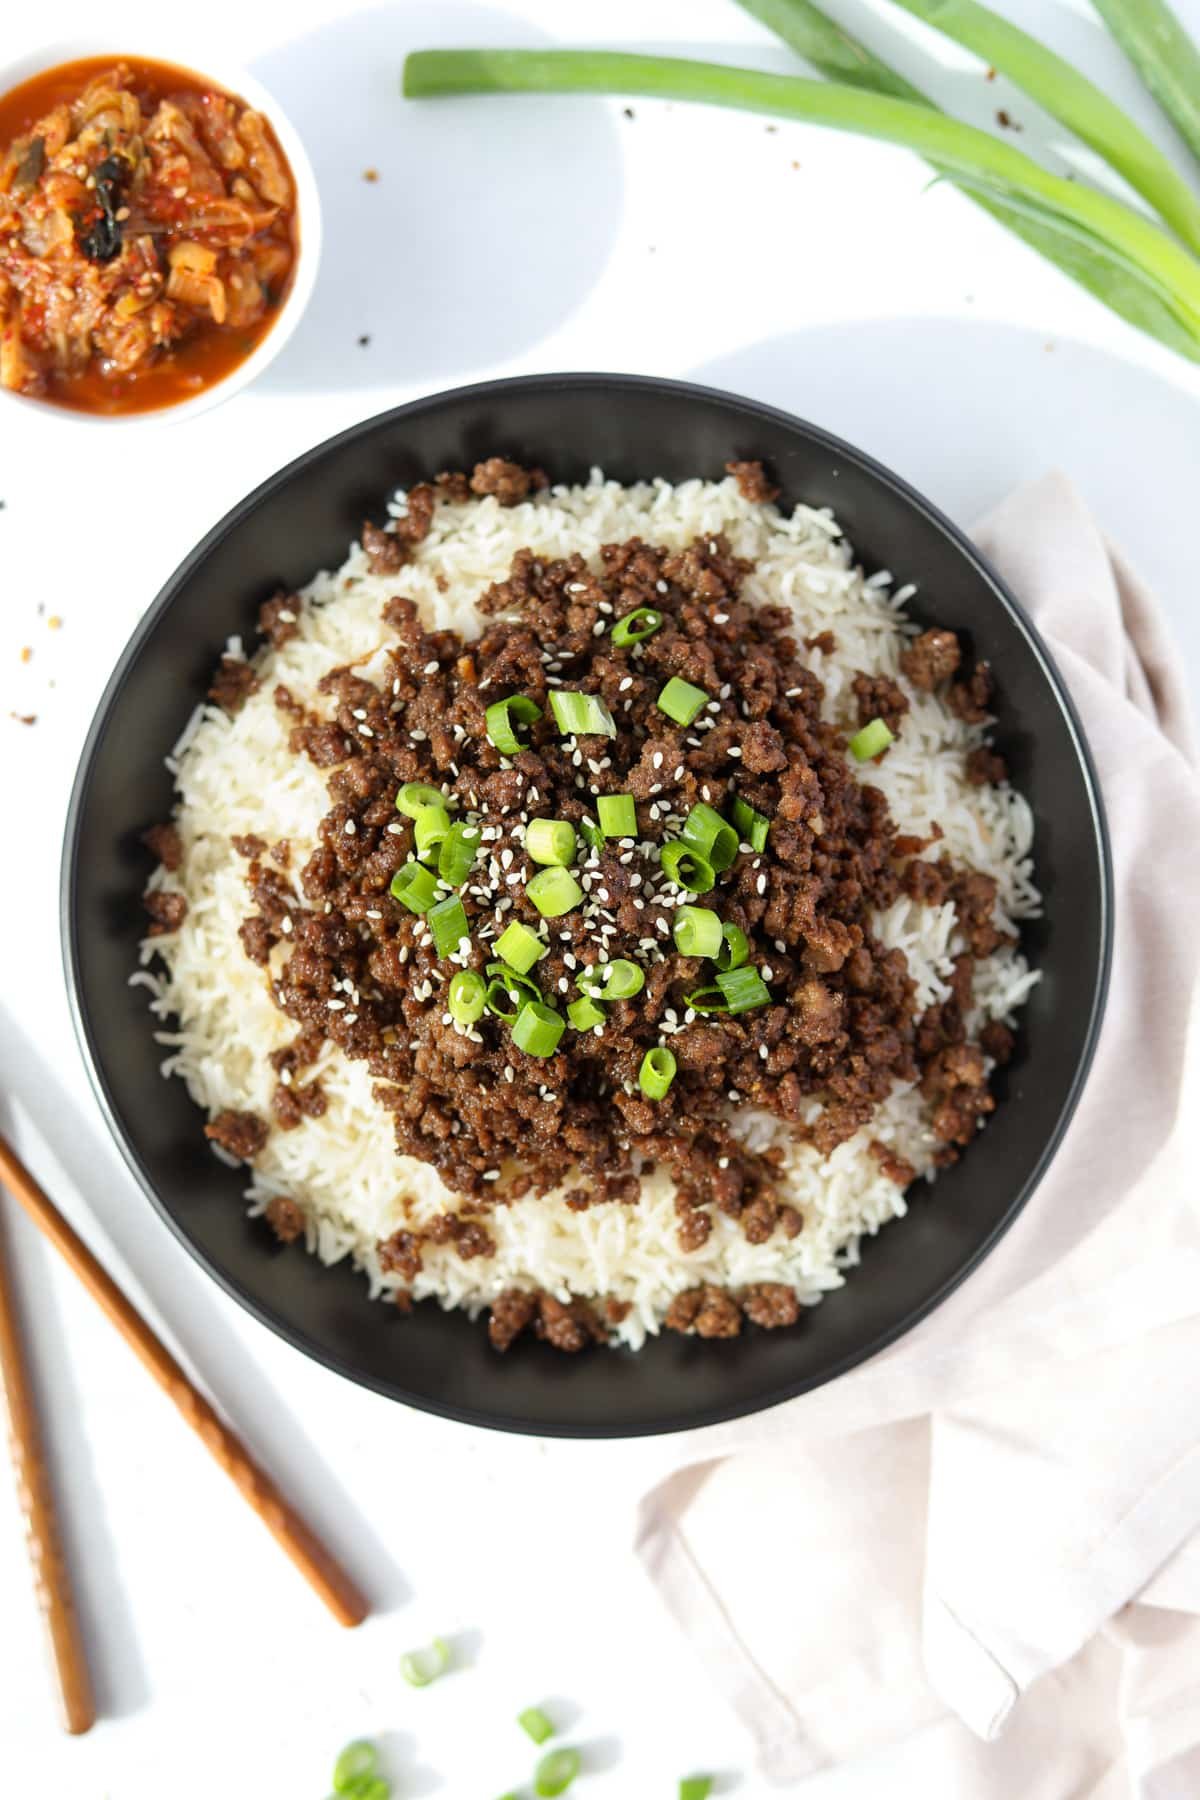 A bowl filled with rice and topped with seasoned ground beef, green onions, and sesame seeds.